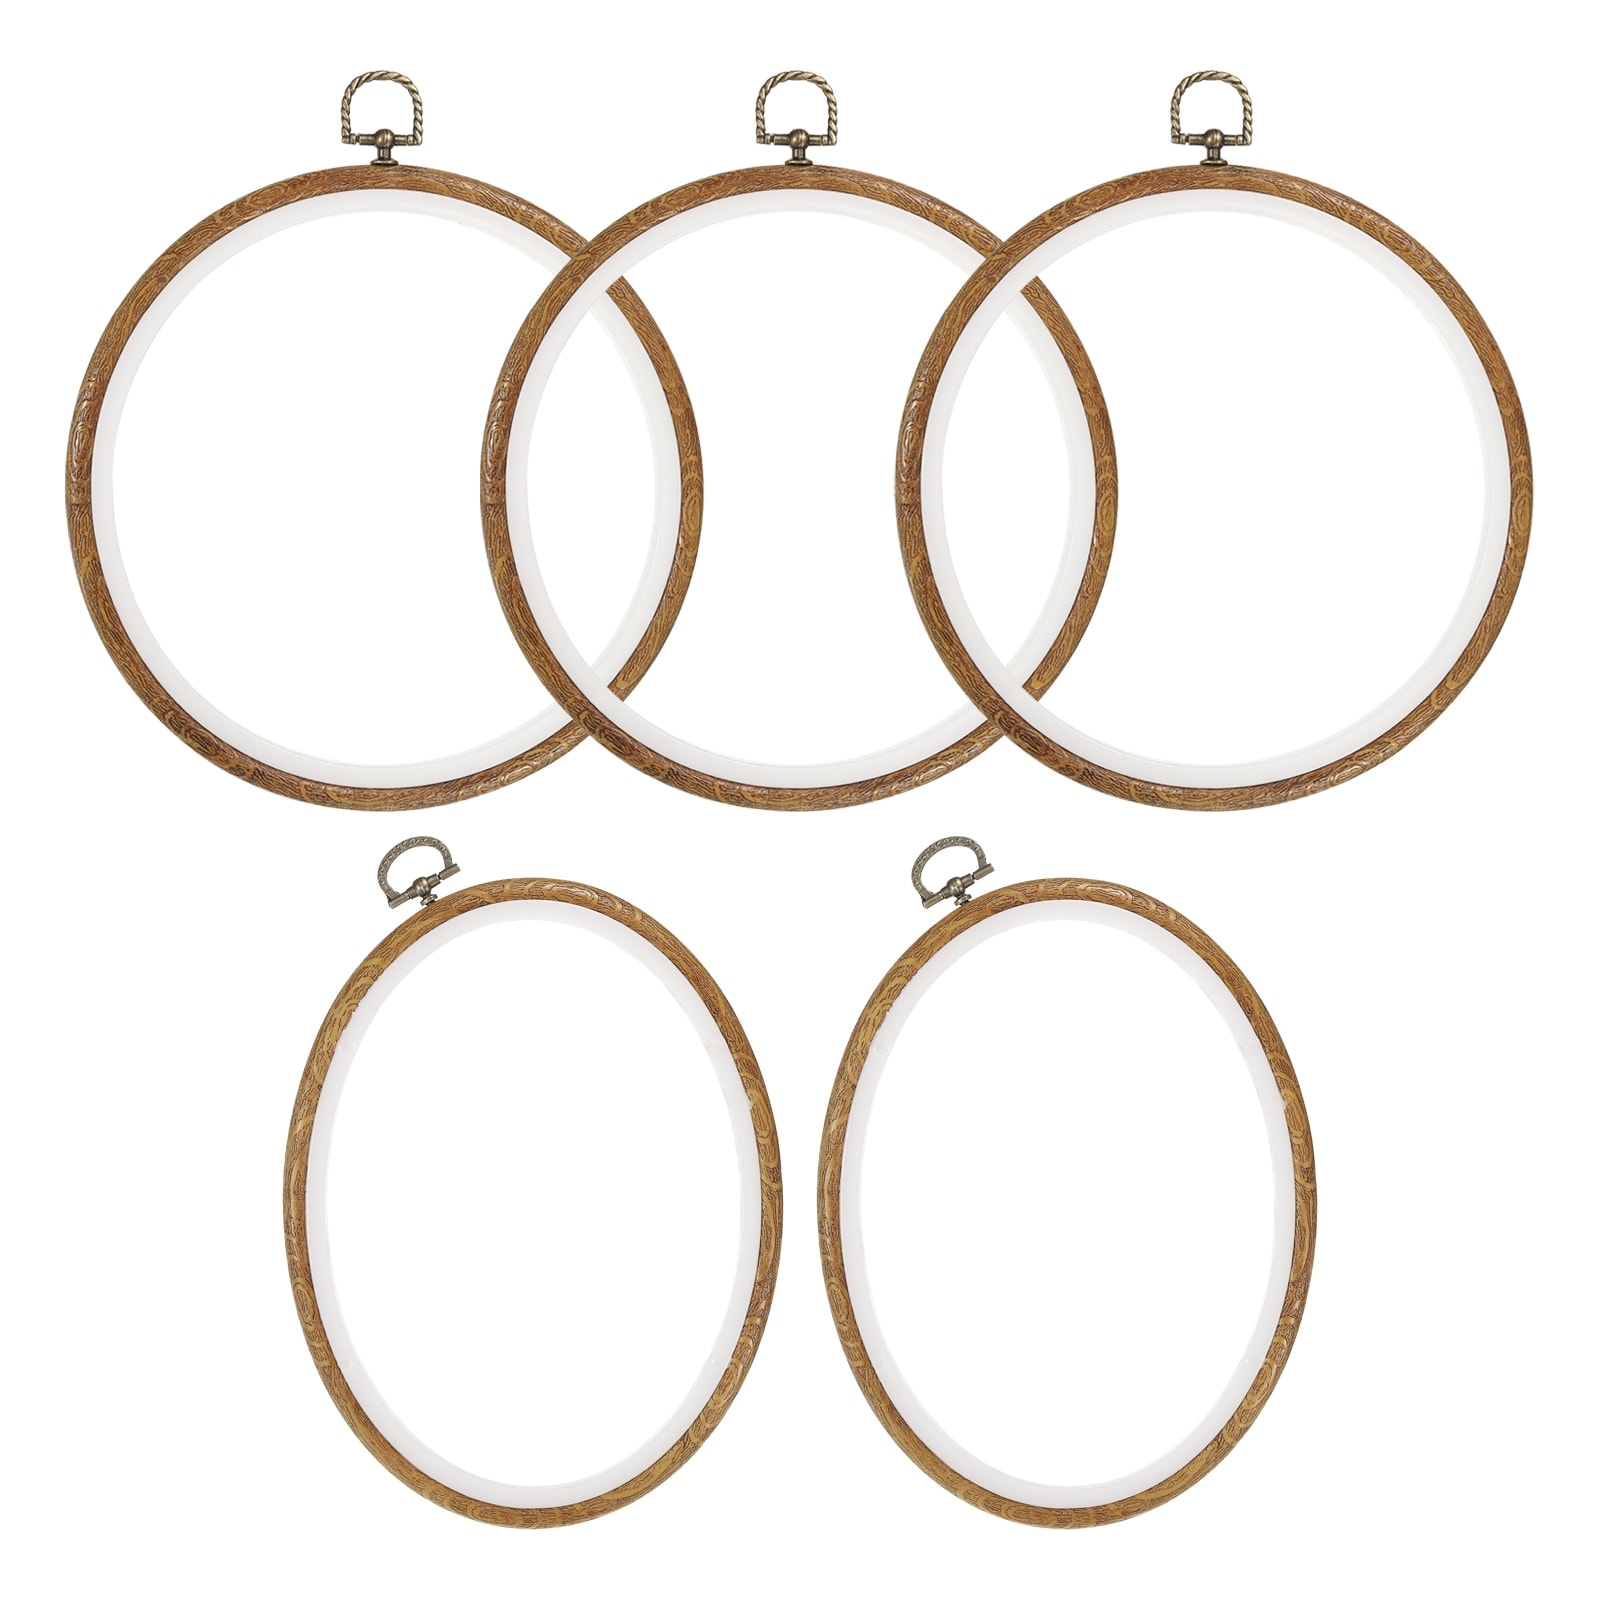 12 Pieces Embroidery Hoop Set Bamboo Circle Cross Stitch Hoop Ring 4 inch  for Embroidery and Cross Stitch 